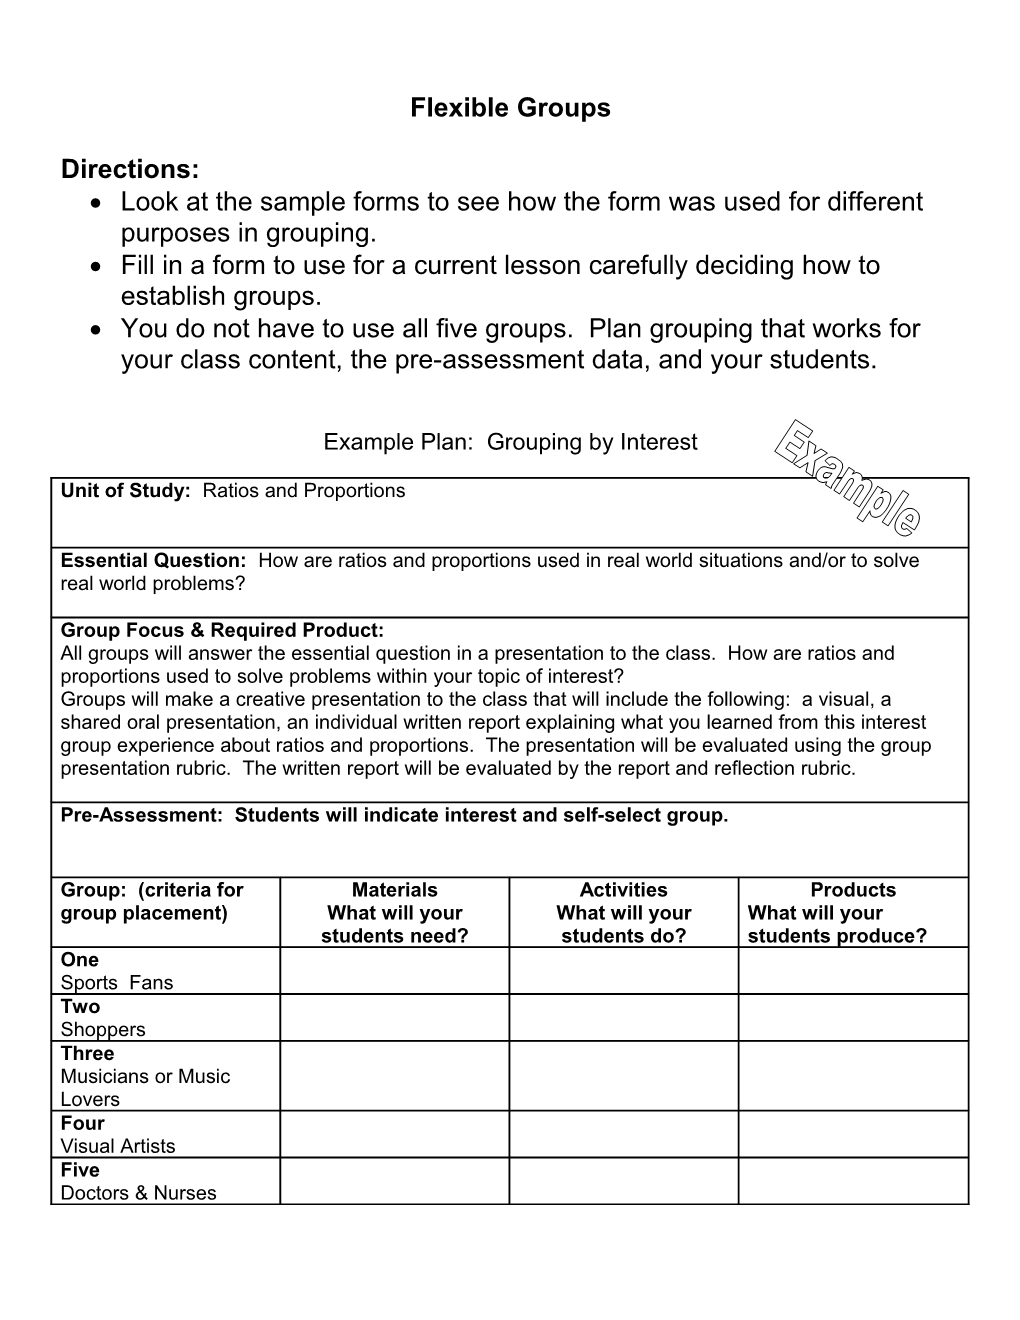 A Template for Designing Flexible Groups